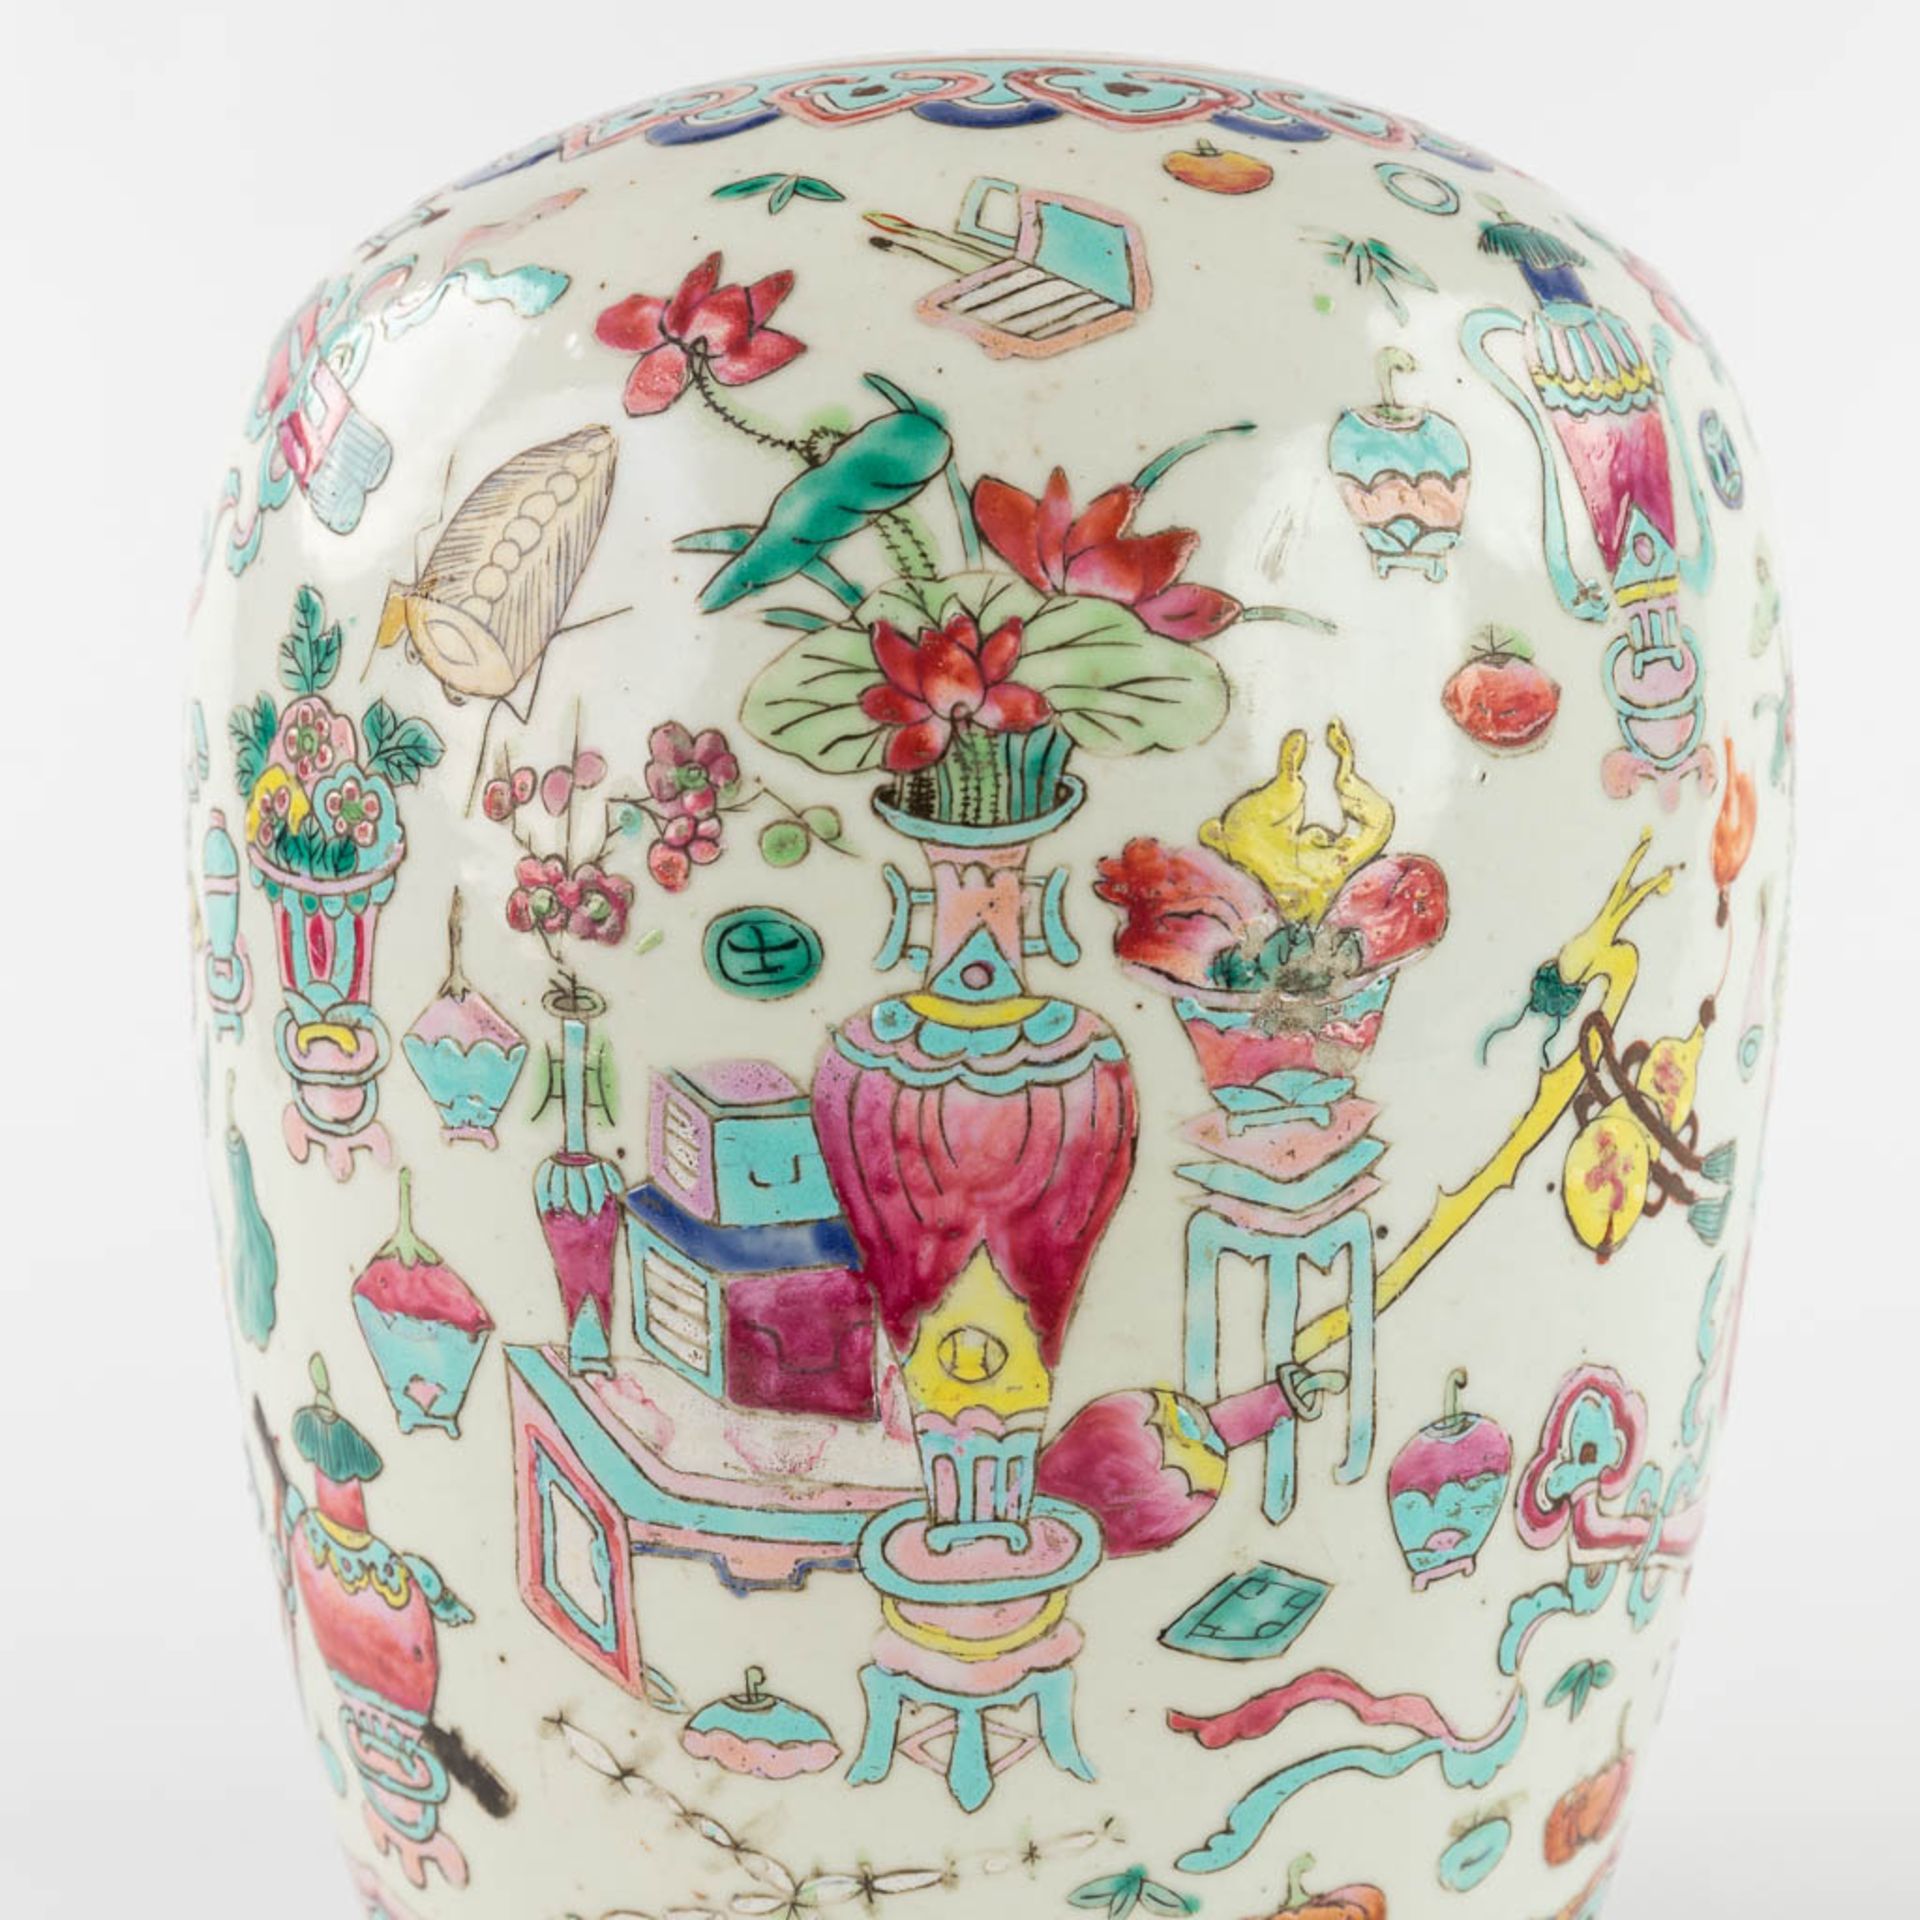 A Chinese Famille Rose ginger jar, decorated with 100 antiquities. 19th/20th C. (H:30 x D:21 cm) - Image 14 of 16